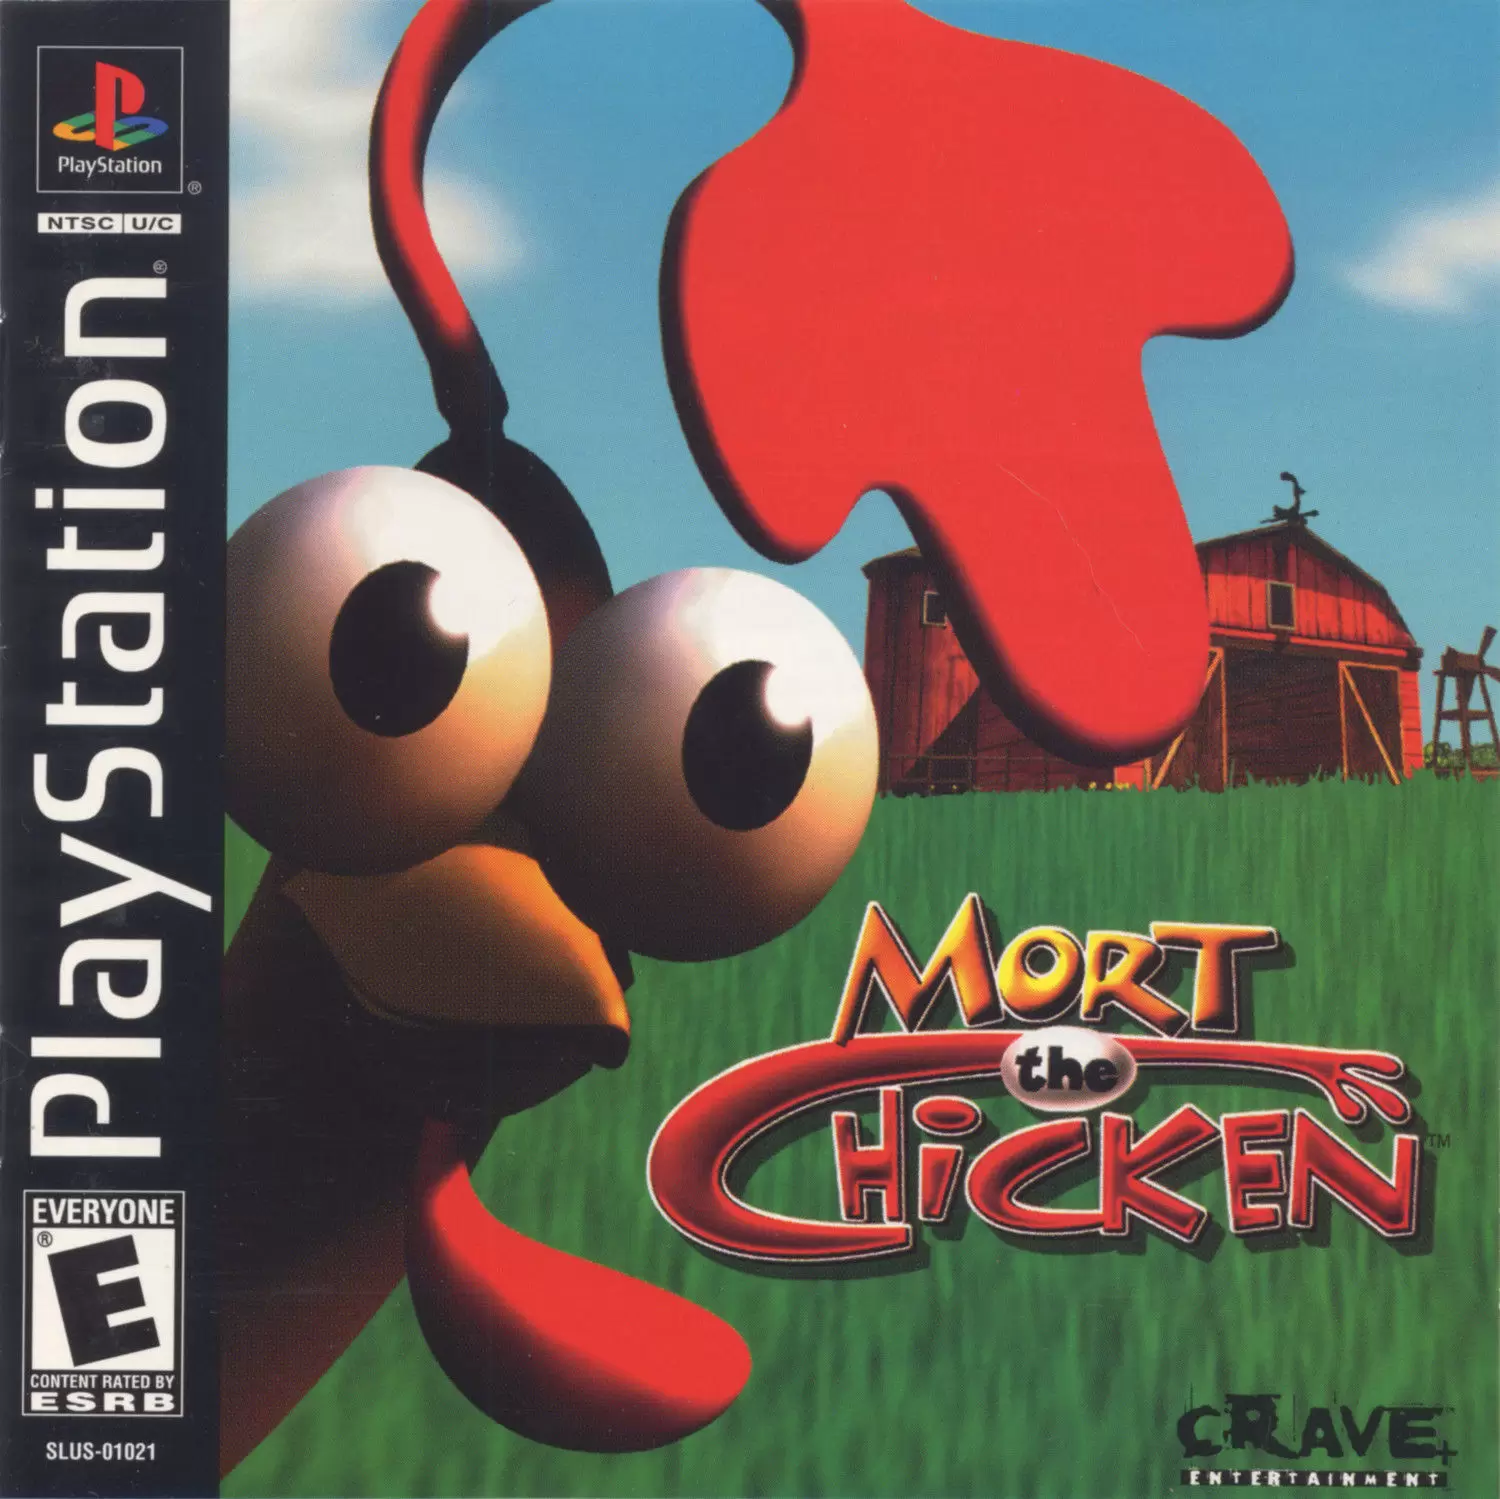 Playstation games - Mort The Chicken